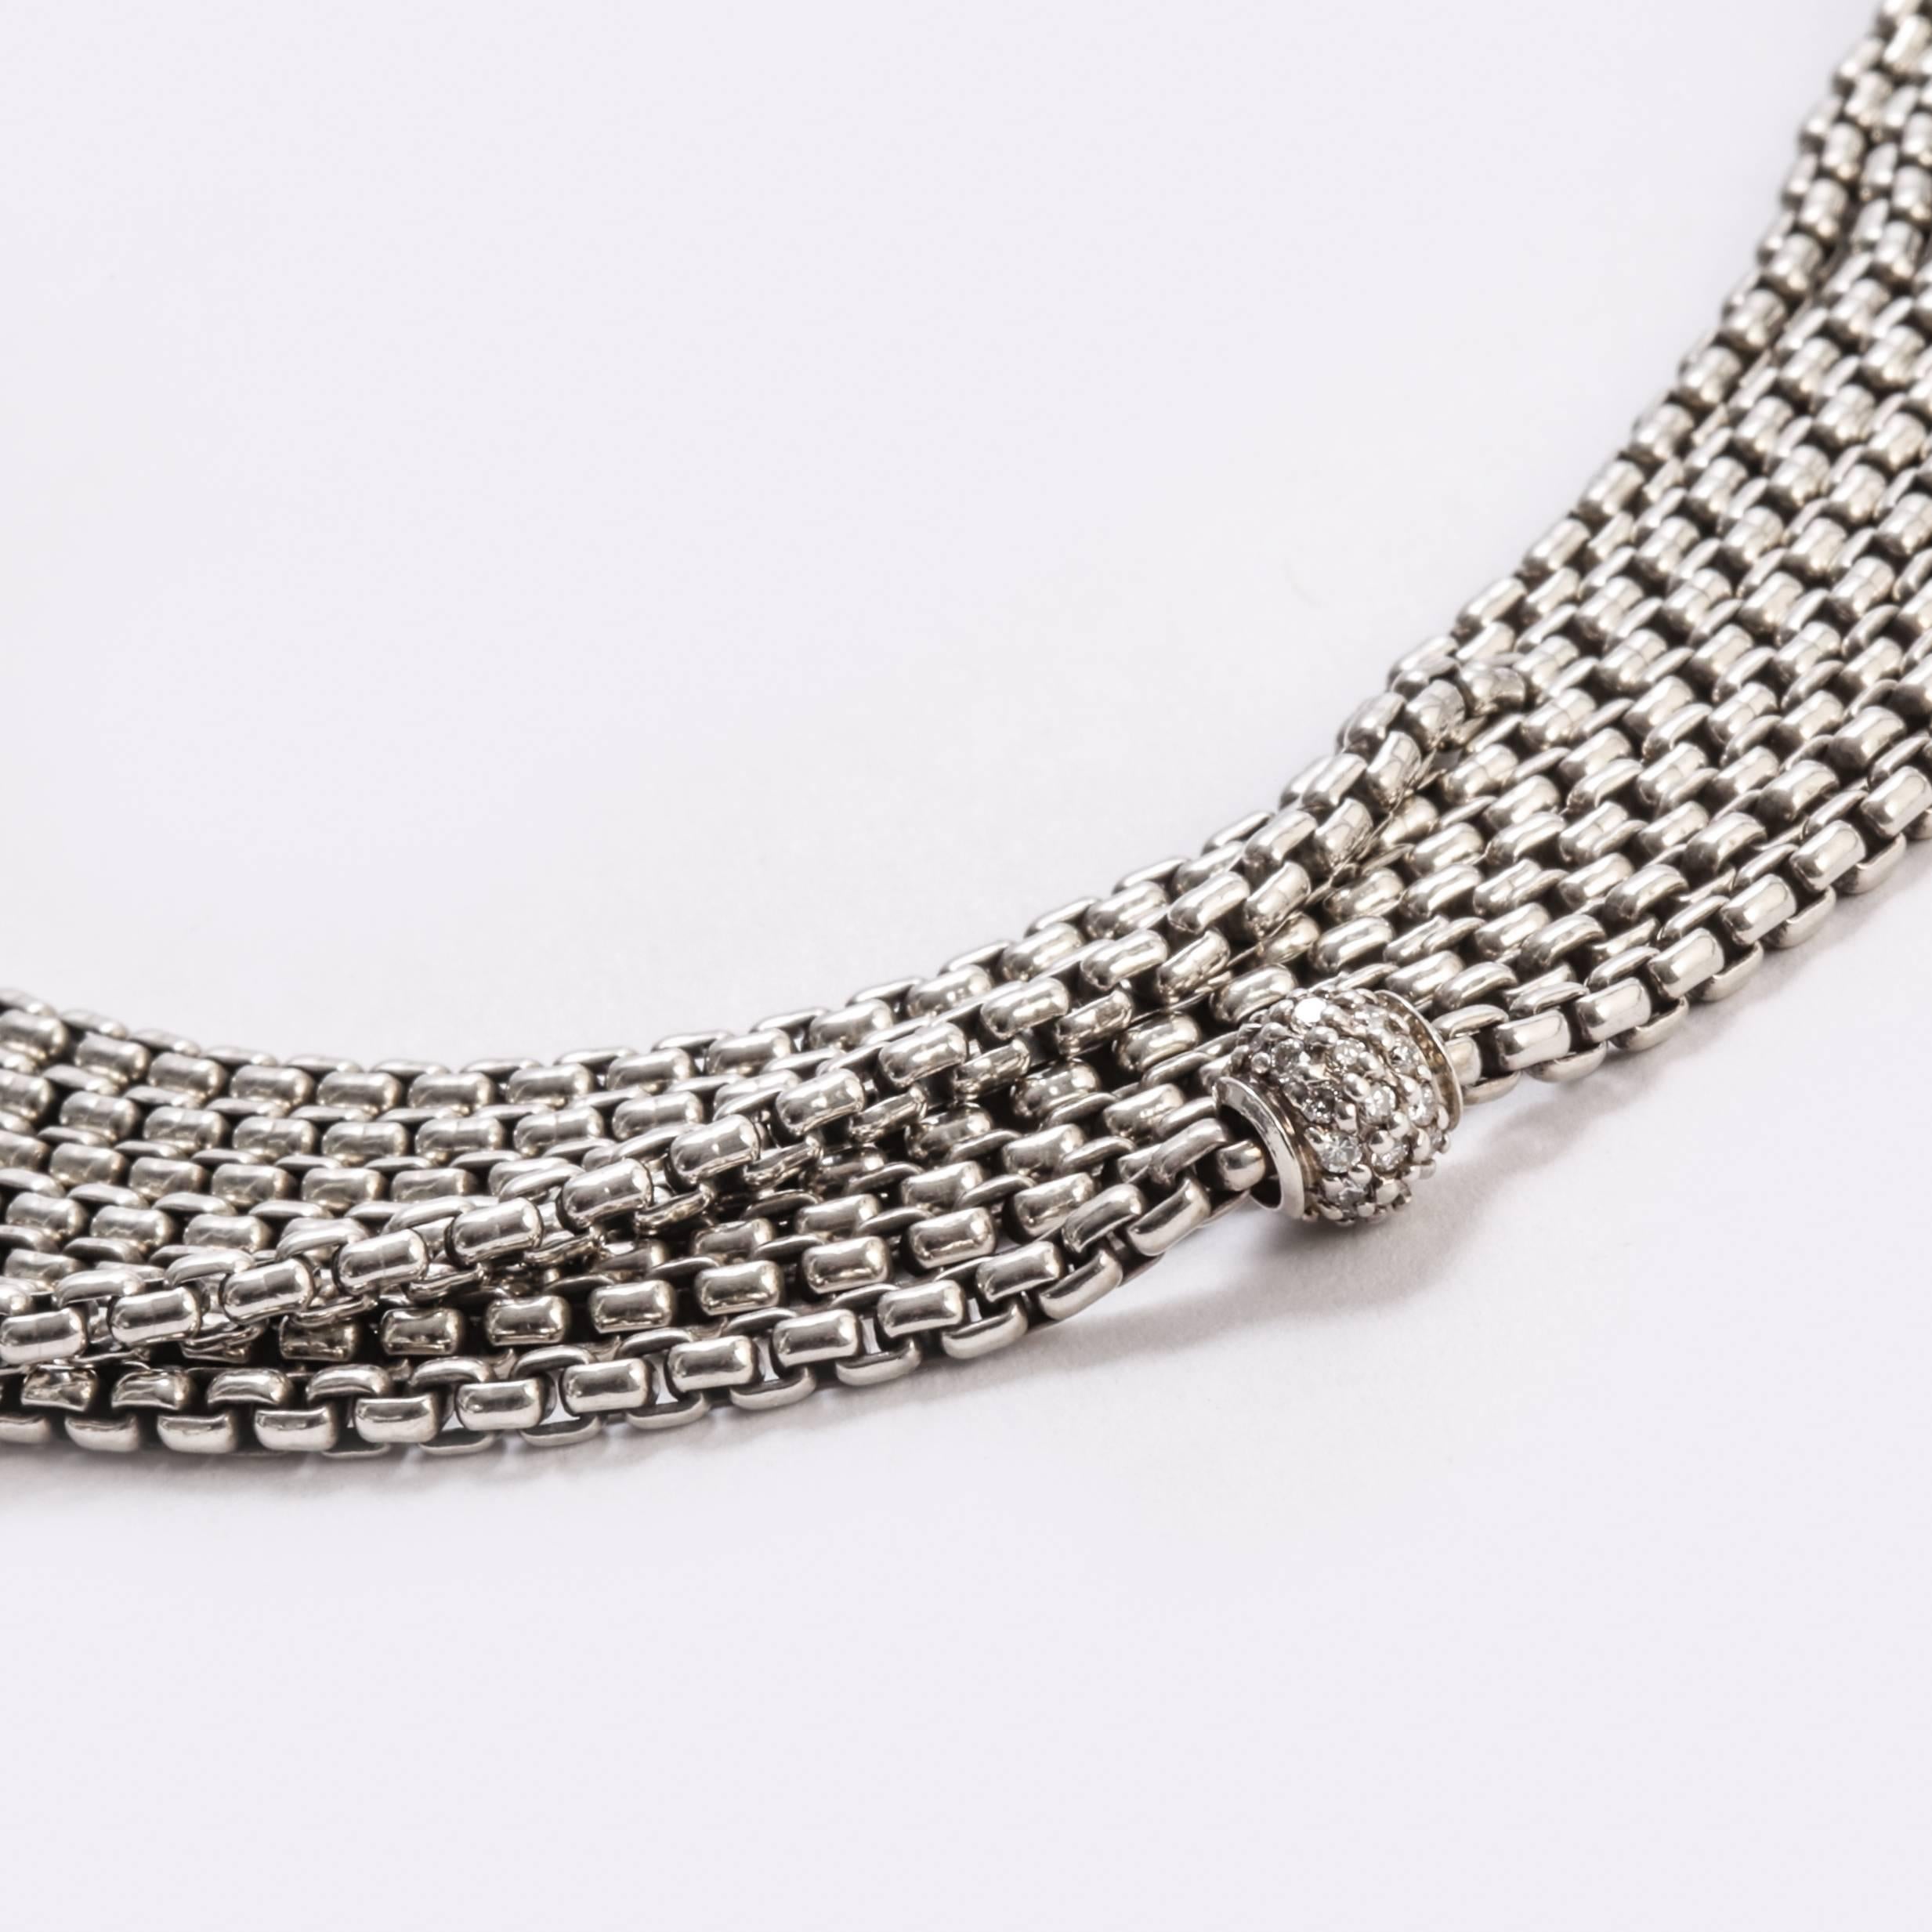 Previously loved sterling silver David Yurman multi-strand box chain necklace with pavé diamond stations throughout, with 18 karat white gold accents and lobster claw clasp closure.